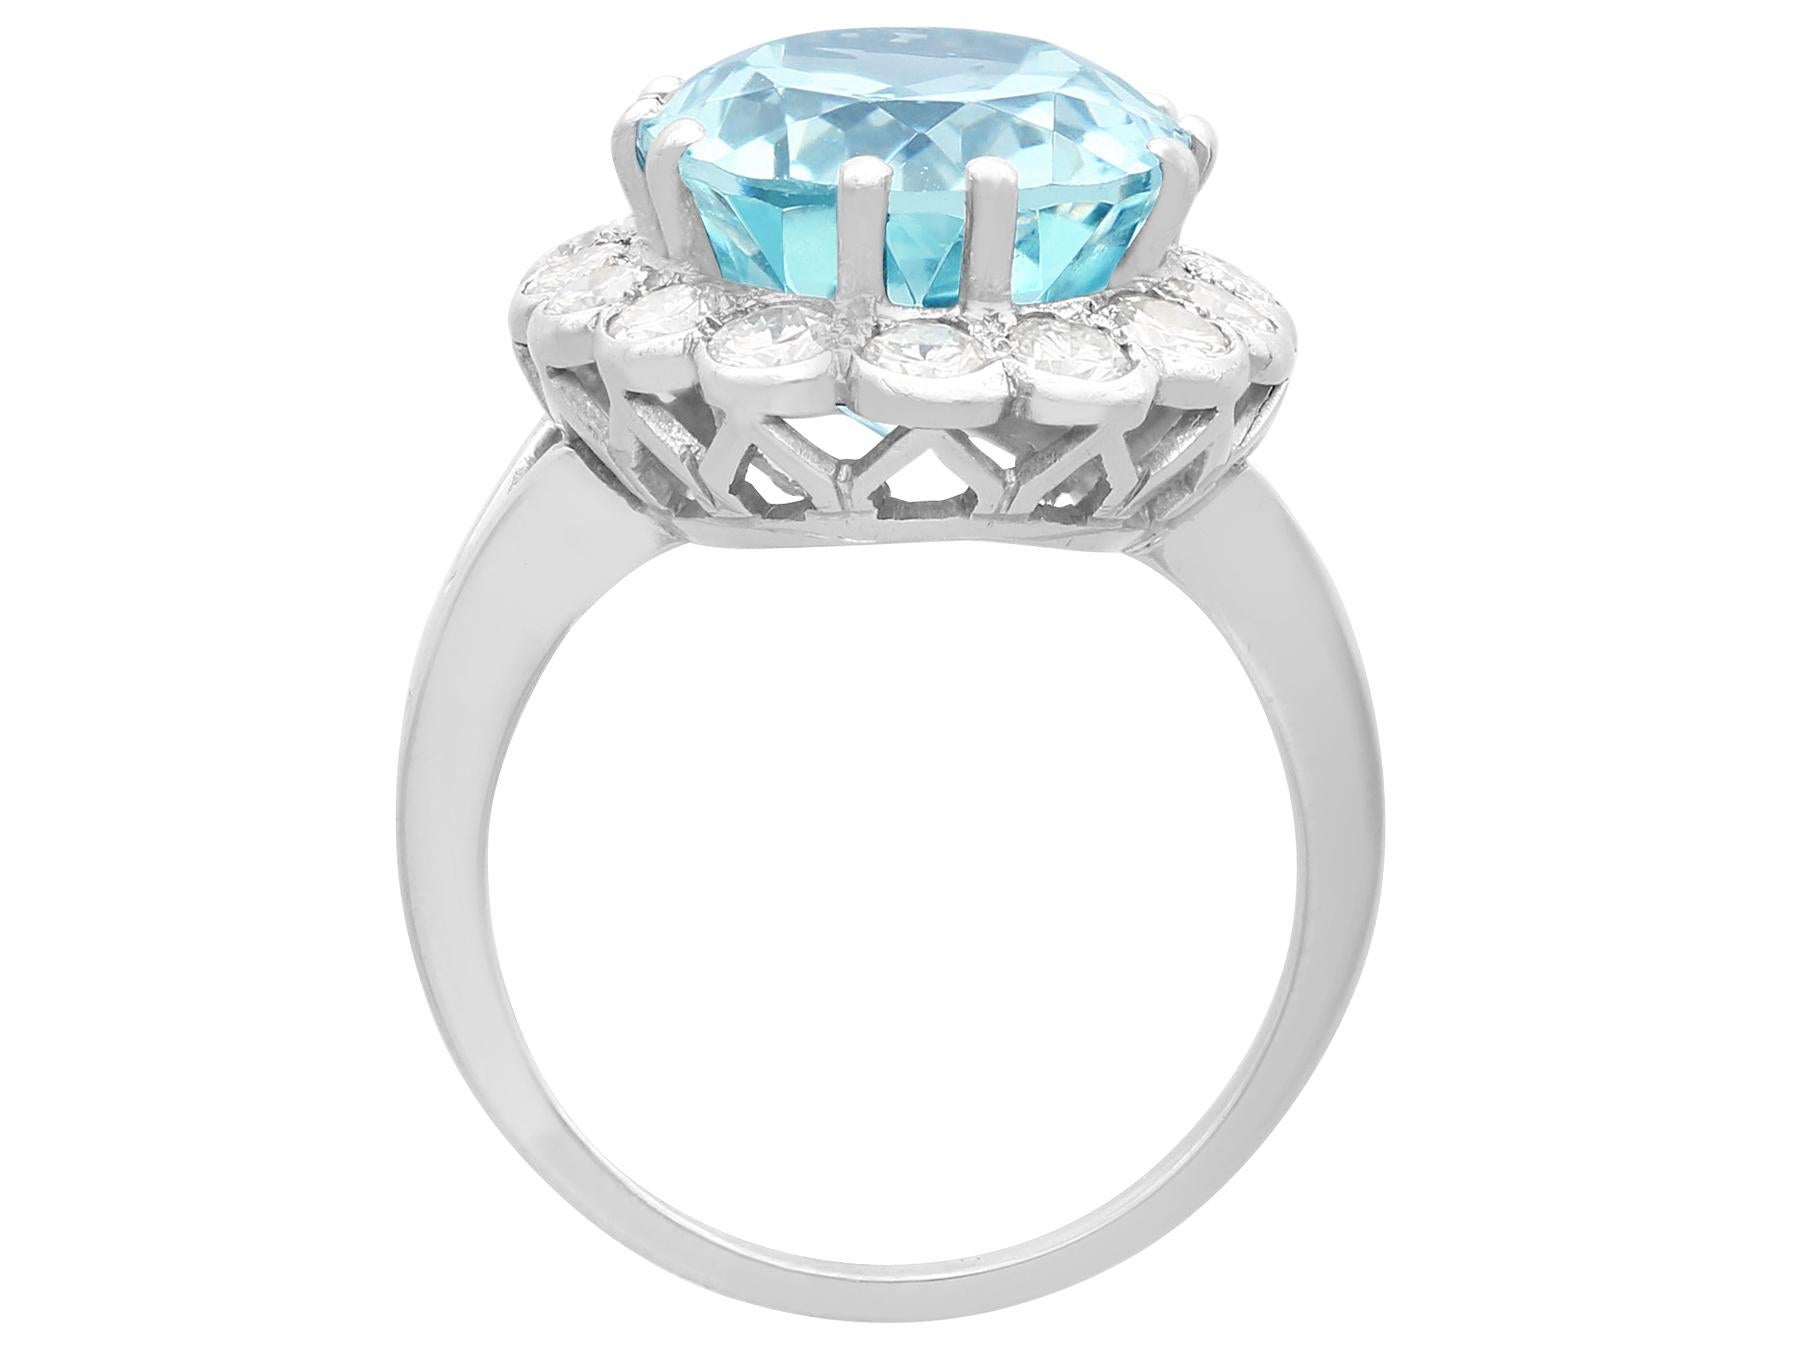 Women's or Men's 7.65 Carat Aquamarine and 1.02 Carat Diamond White Gold Cocktail Ring For Sale